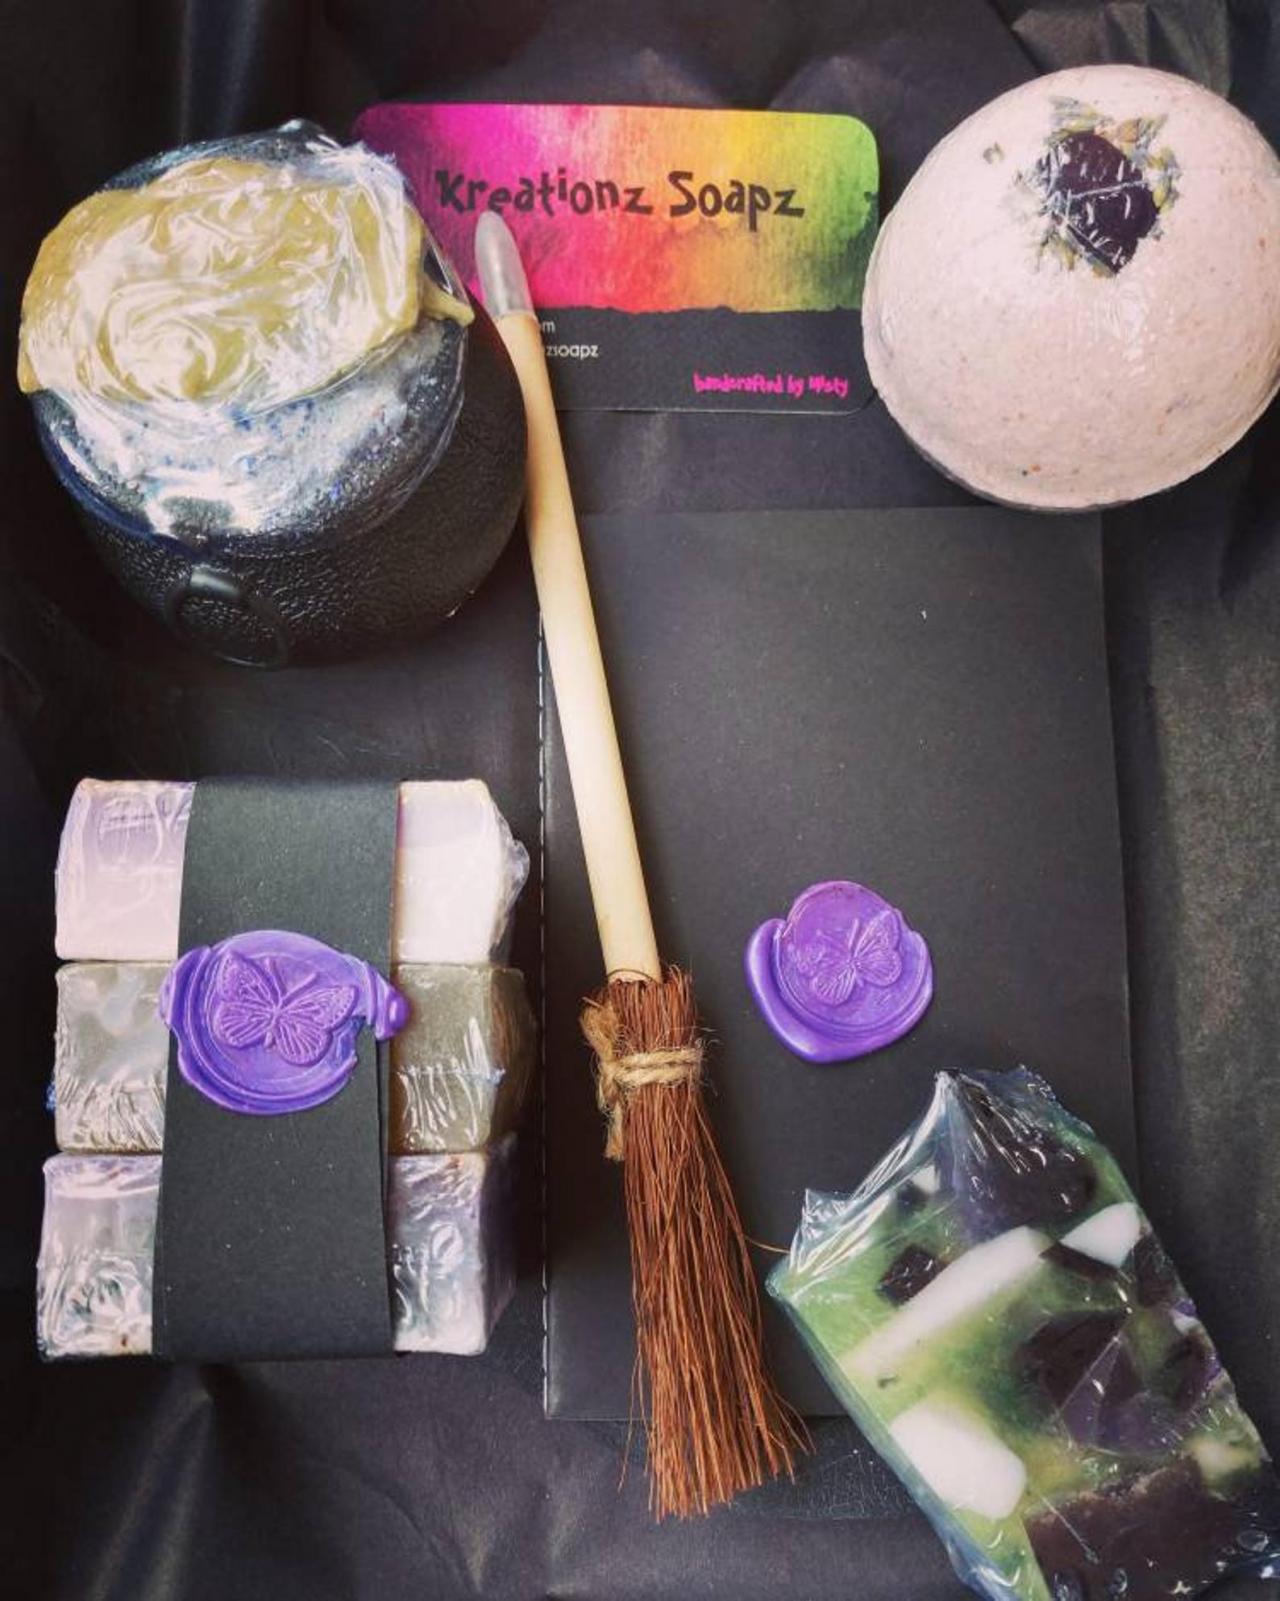 GYPSY WITCHES BREW gift set with all natural herb infused soaps cauldron bath bomb with gemstone and seashells book and broom pen